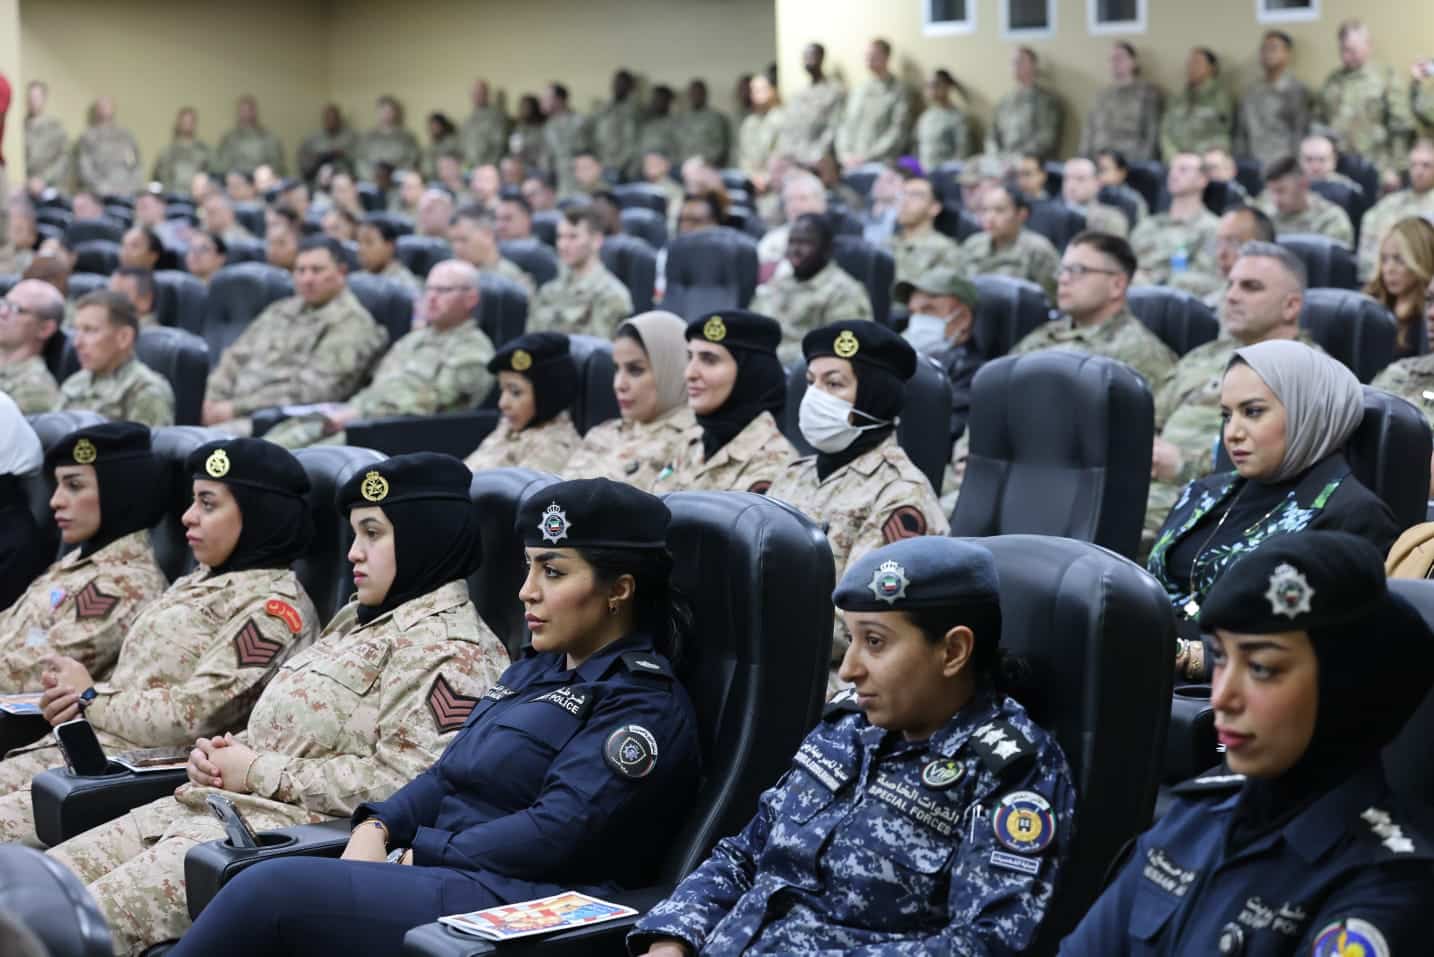 Female officials from Kuwaiti Ministry of Defense and Interior attending the event. 